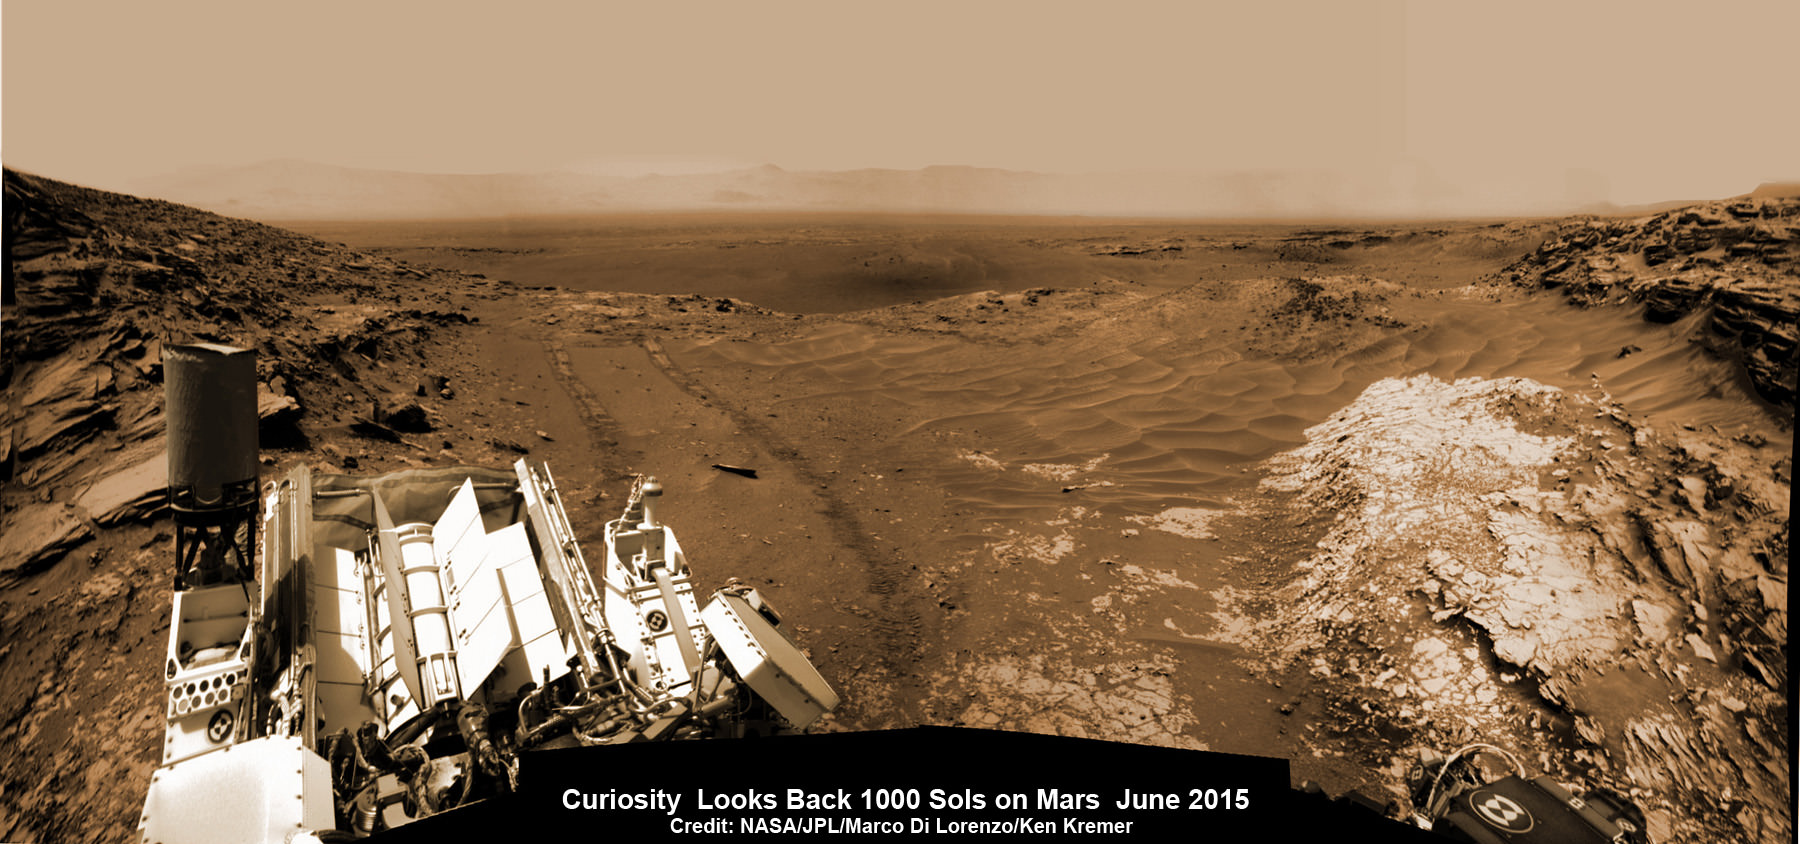 NASA’s Martian Curiosity rover looks backs to 1000 Sols of science and exploration on the surface of the Red Planet.  Robot wheel tracks lead back through valley dunes.  Gale Crater rim seen in the distant hazy background.  Sol 997 (May 28, 2015) navcam camera raw images stitched and colorized. Credit:  NASA/JPL-Caltech/ Marco Di Lorenzo/Ken Kremer/kenkremer.com